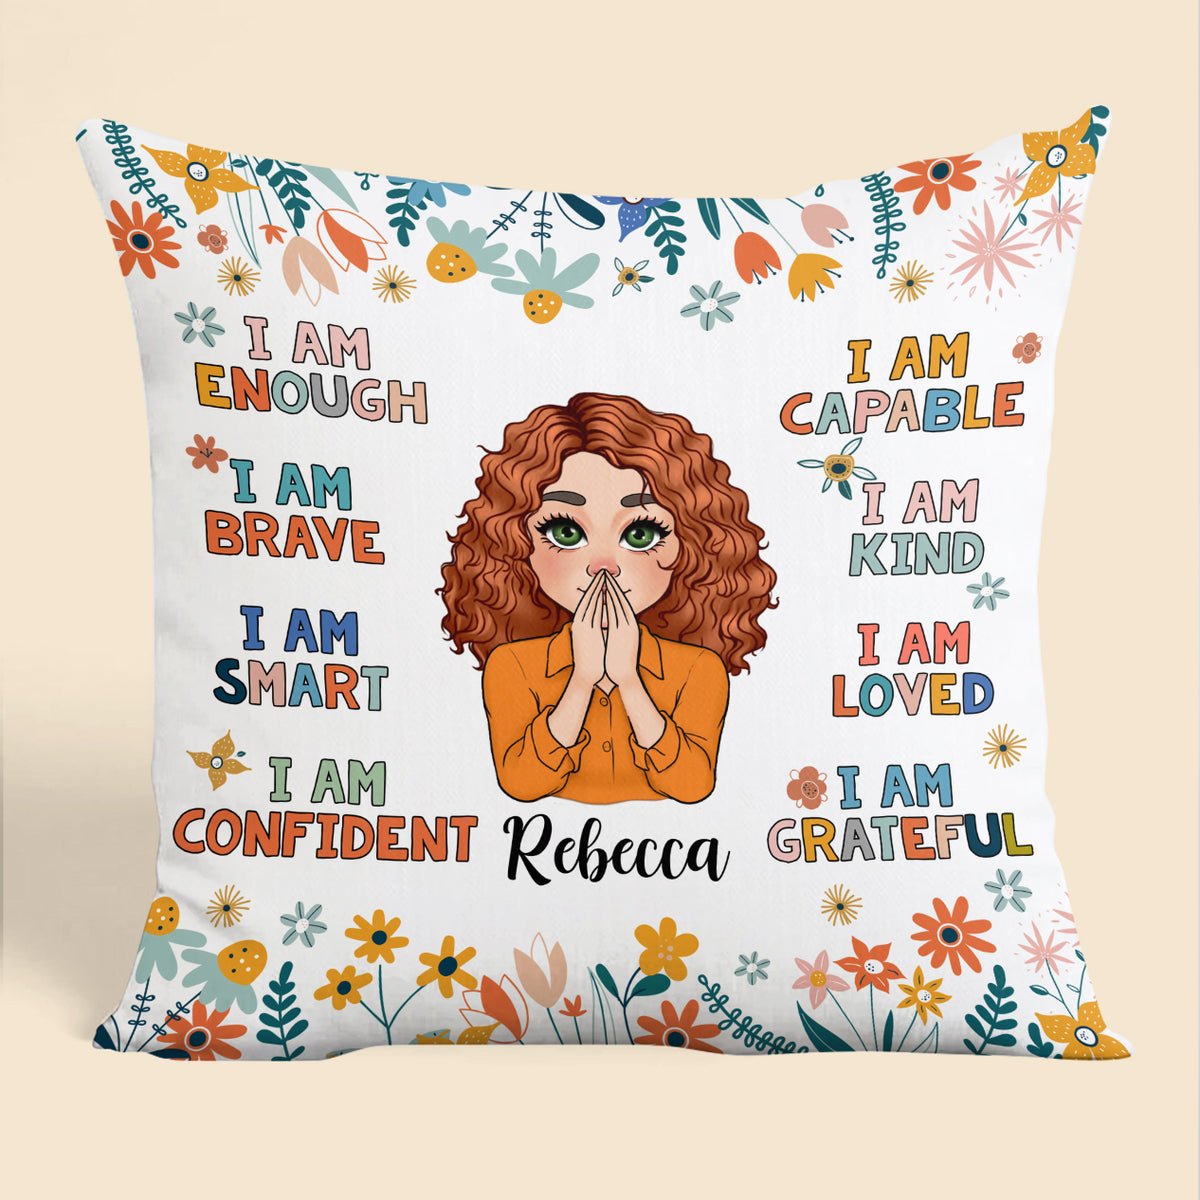 I Am Kind - Personalized Pillow - Best Gift For Mother, Daughter, Sister, Friend, Wife - Giftago